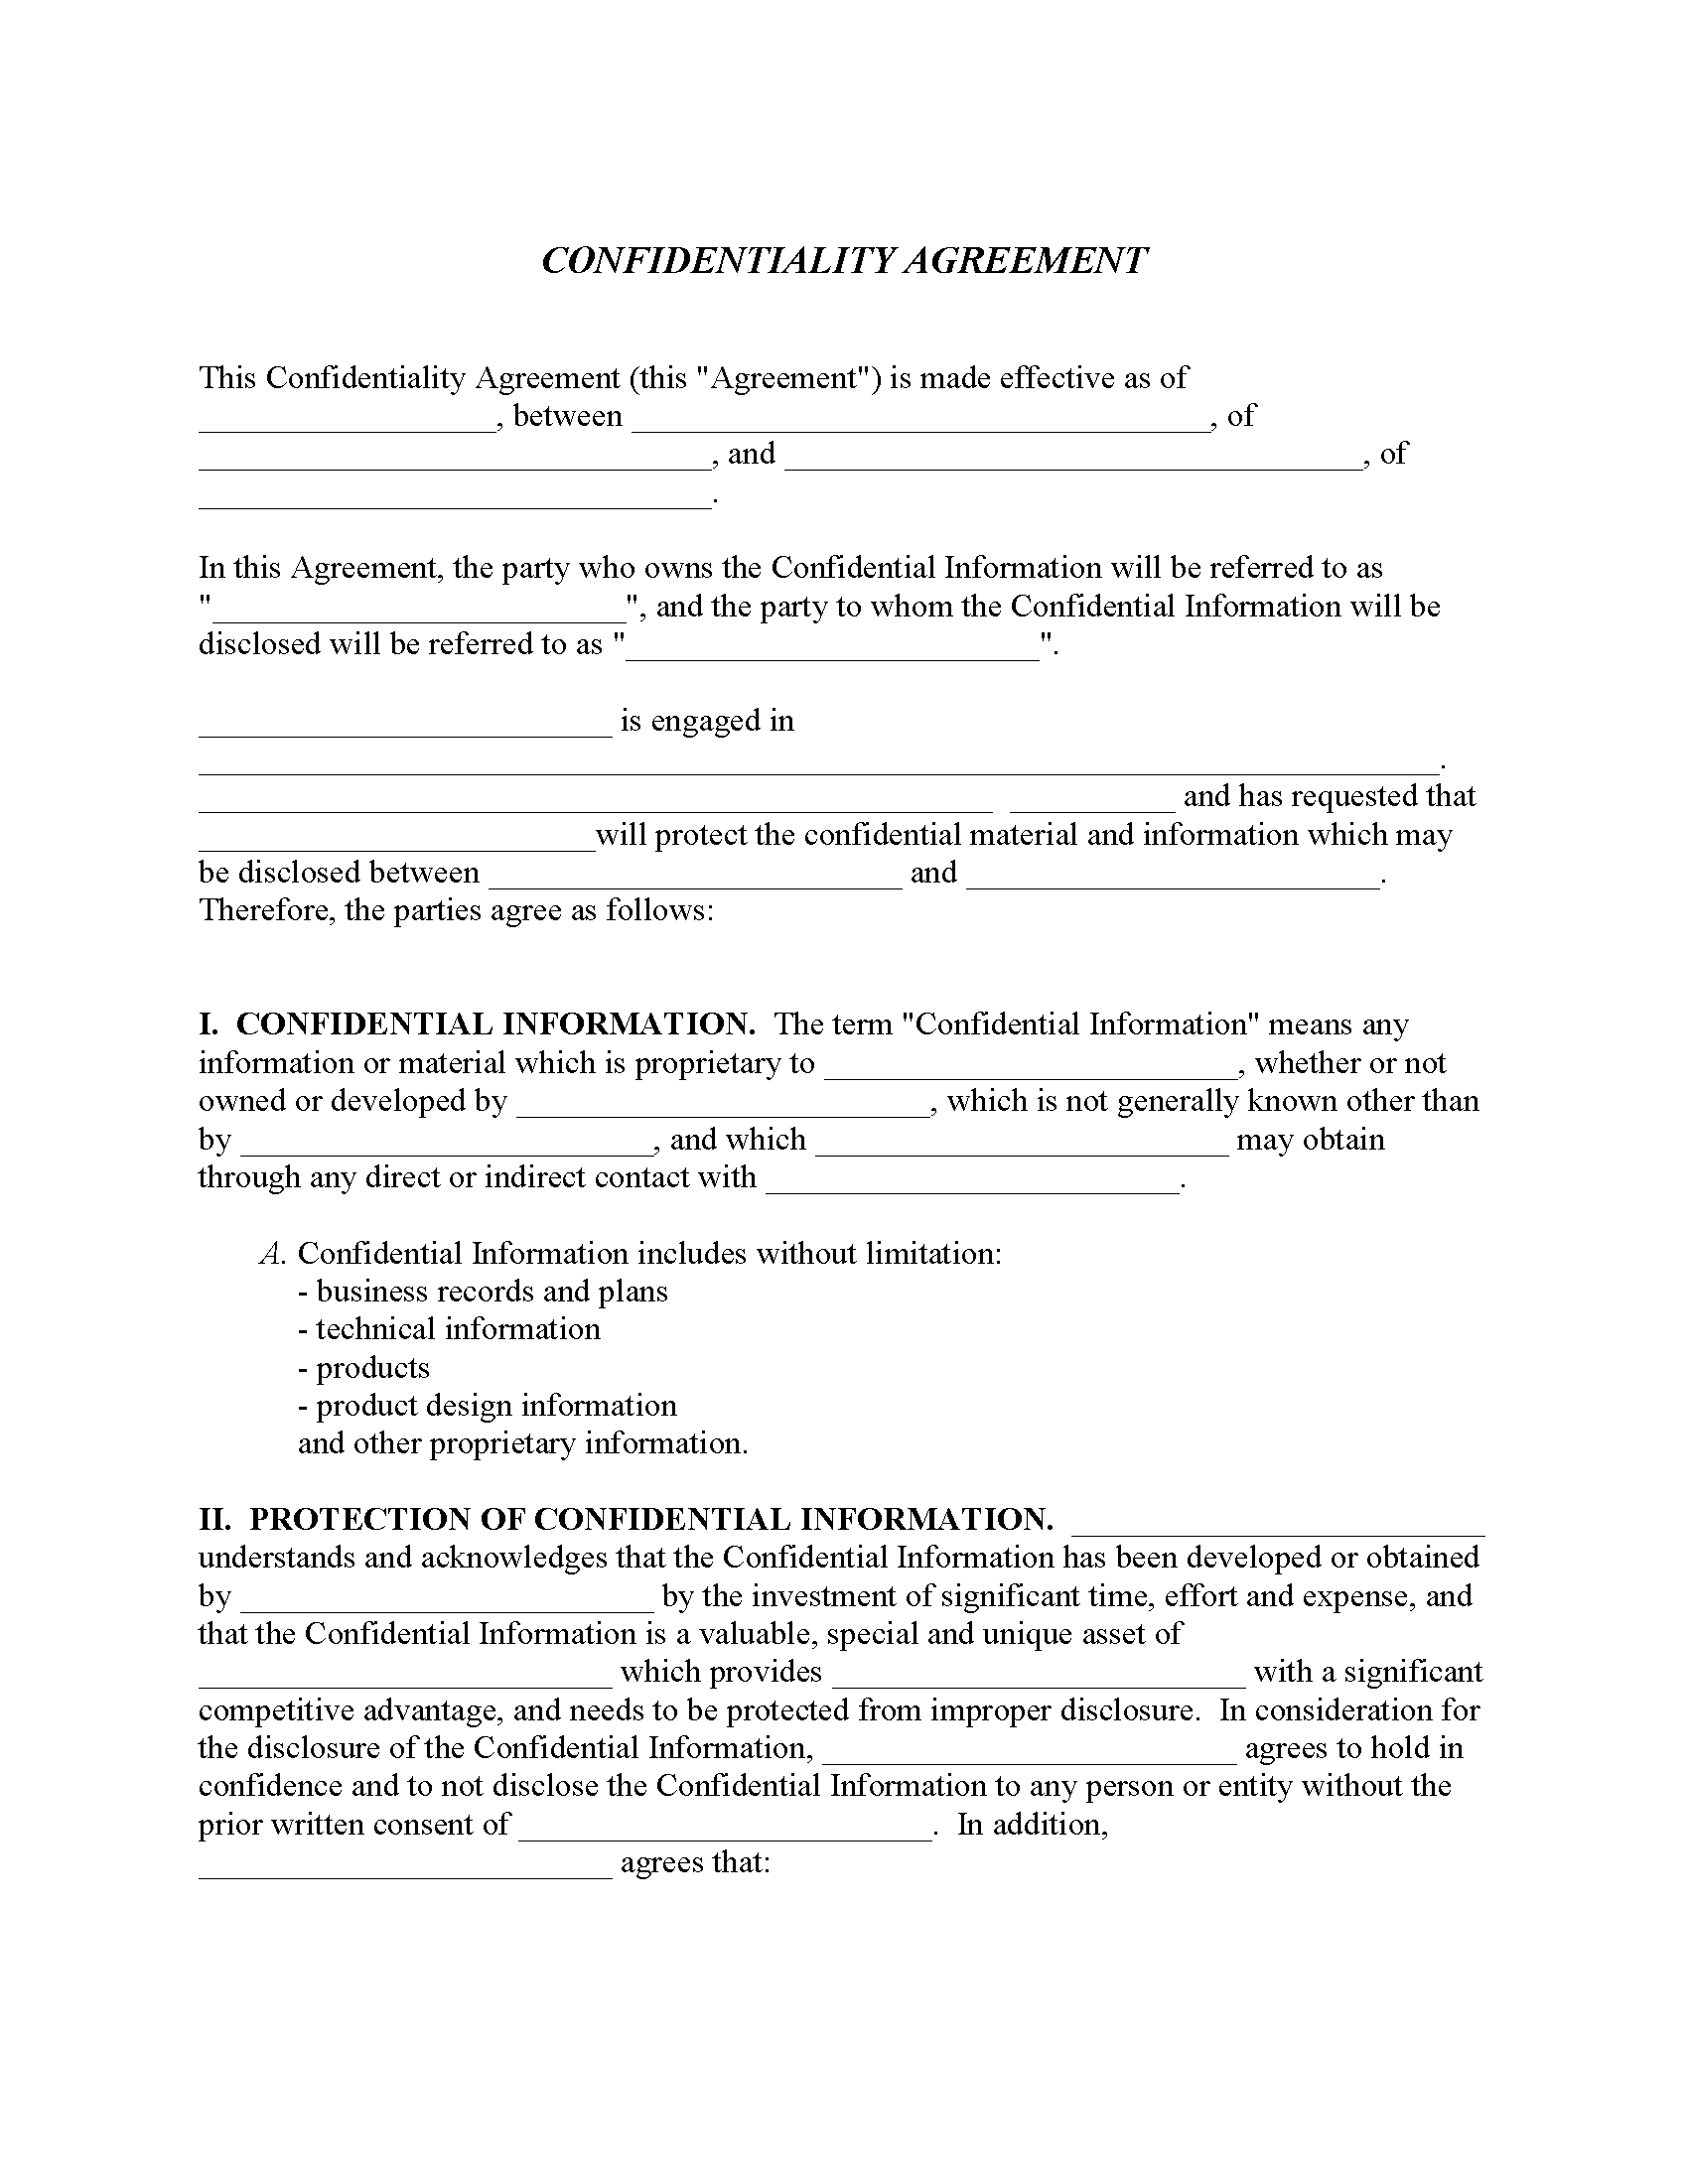 confidentiality-agreement-fillable-pdf-free-printable-legal-forms